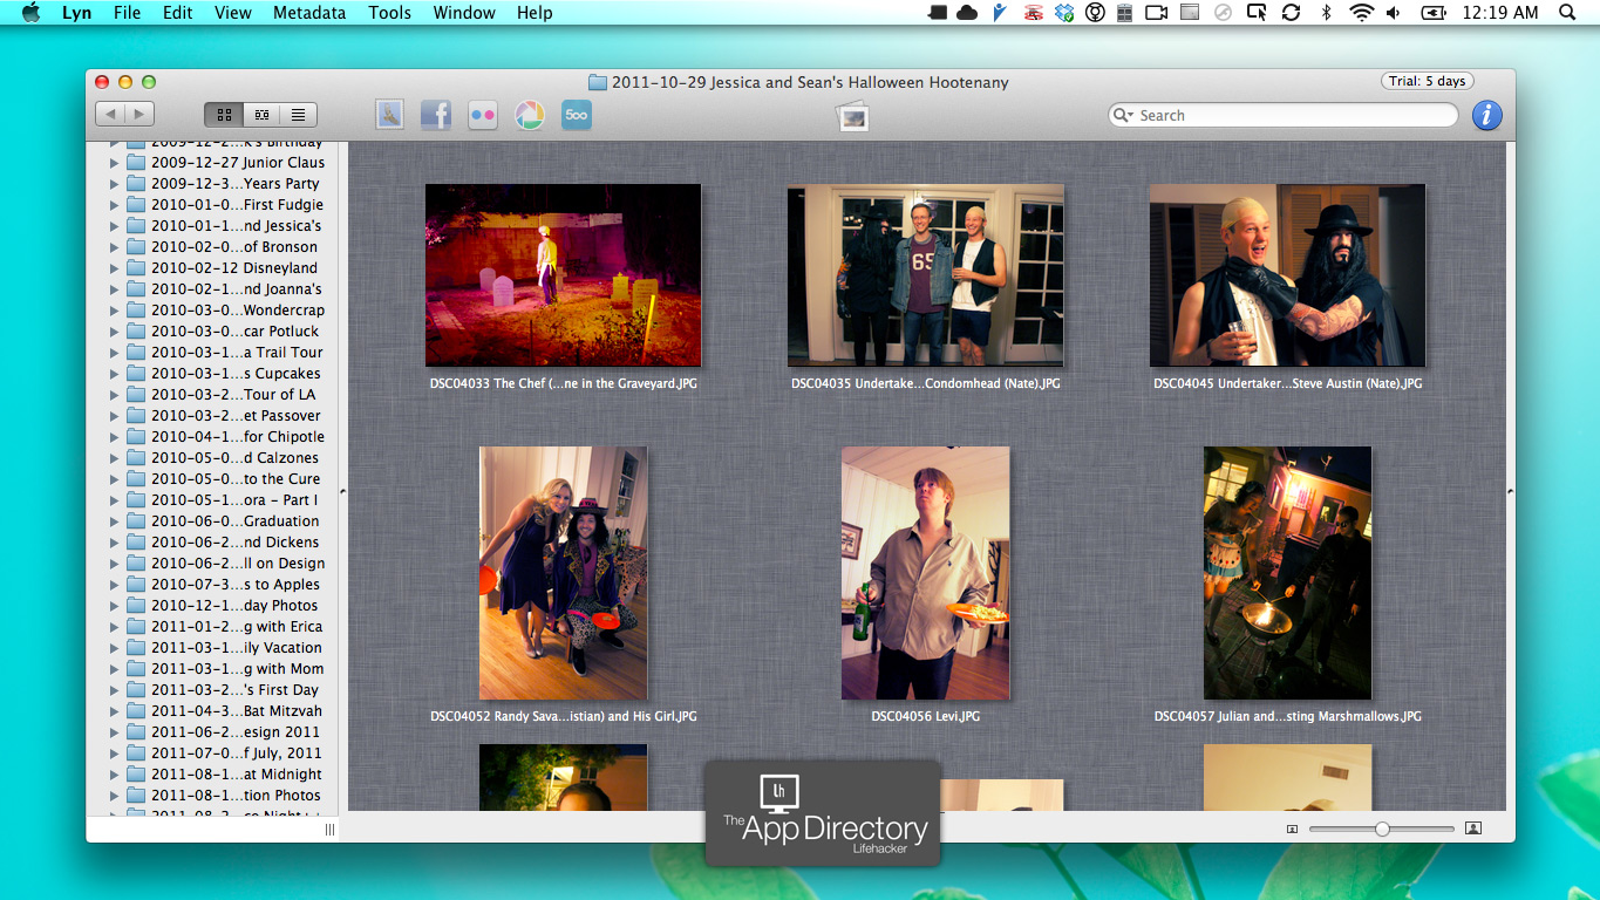 redownload iphoto for mac os x 10.7.5